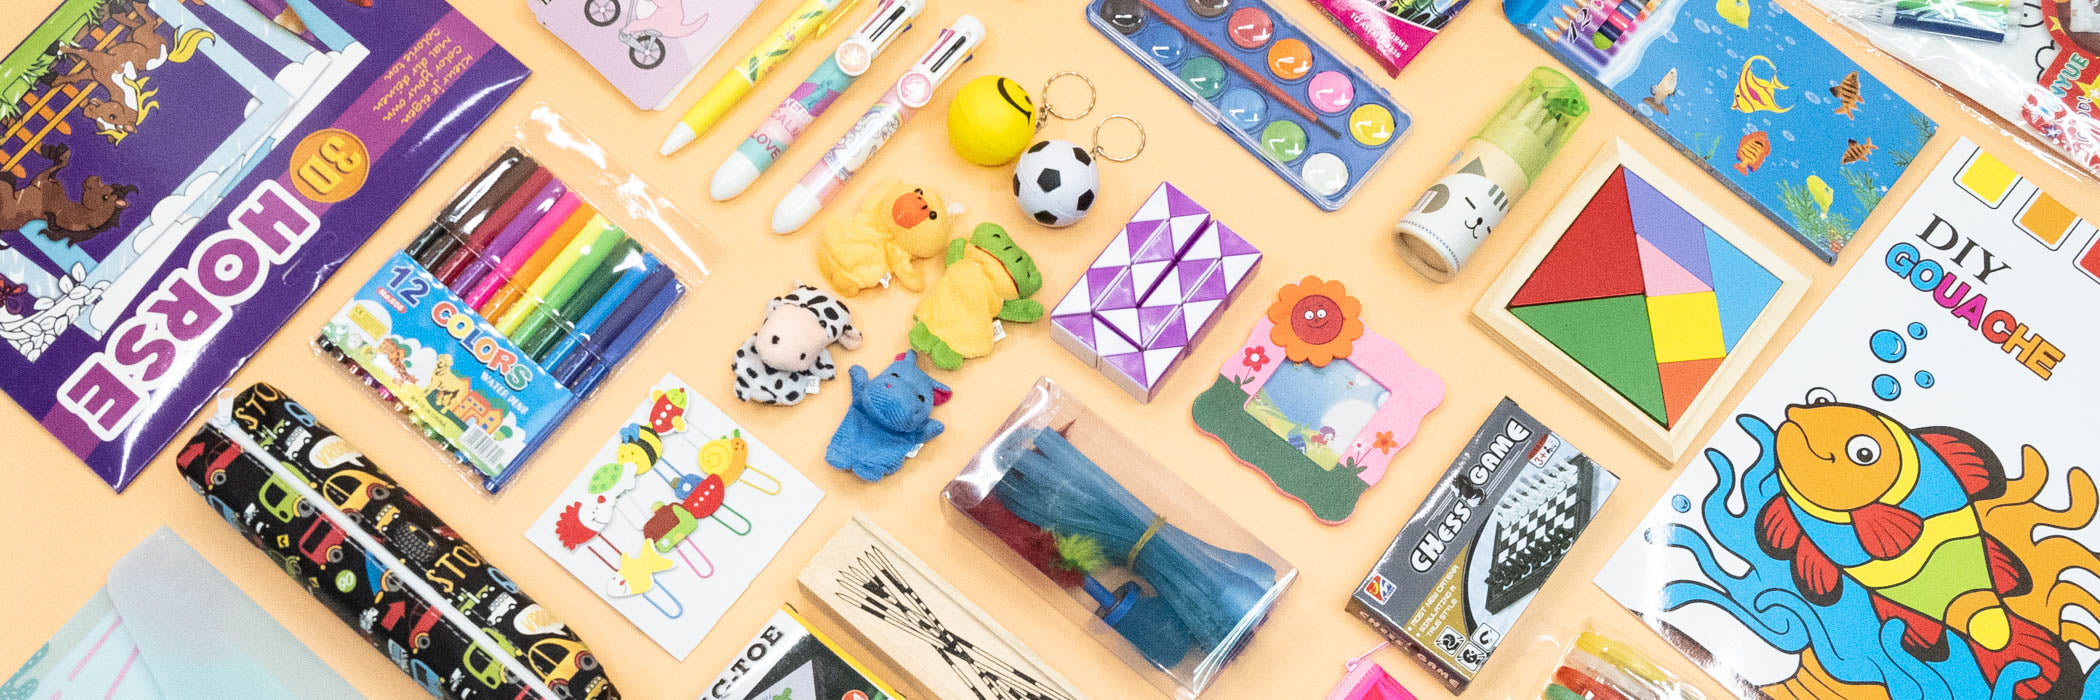 Junk Food 3D Erasers Kids Stationery (pack of 12) - Only $3.60 at Carnival  Source